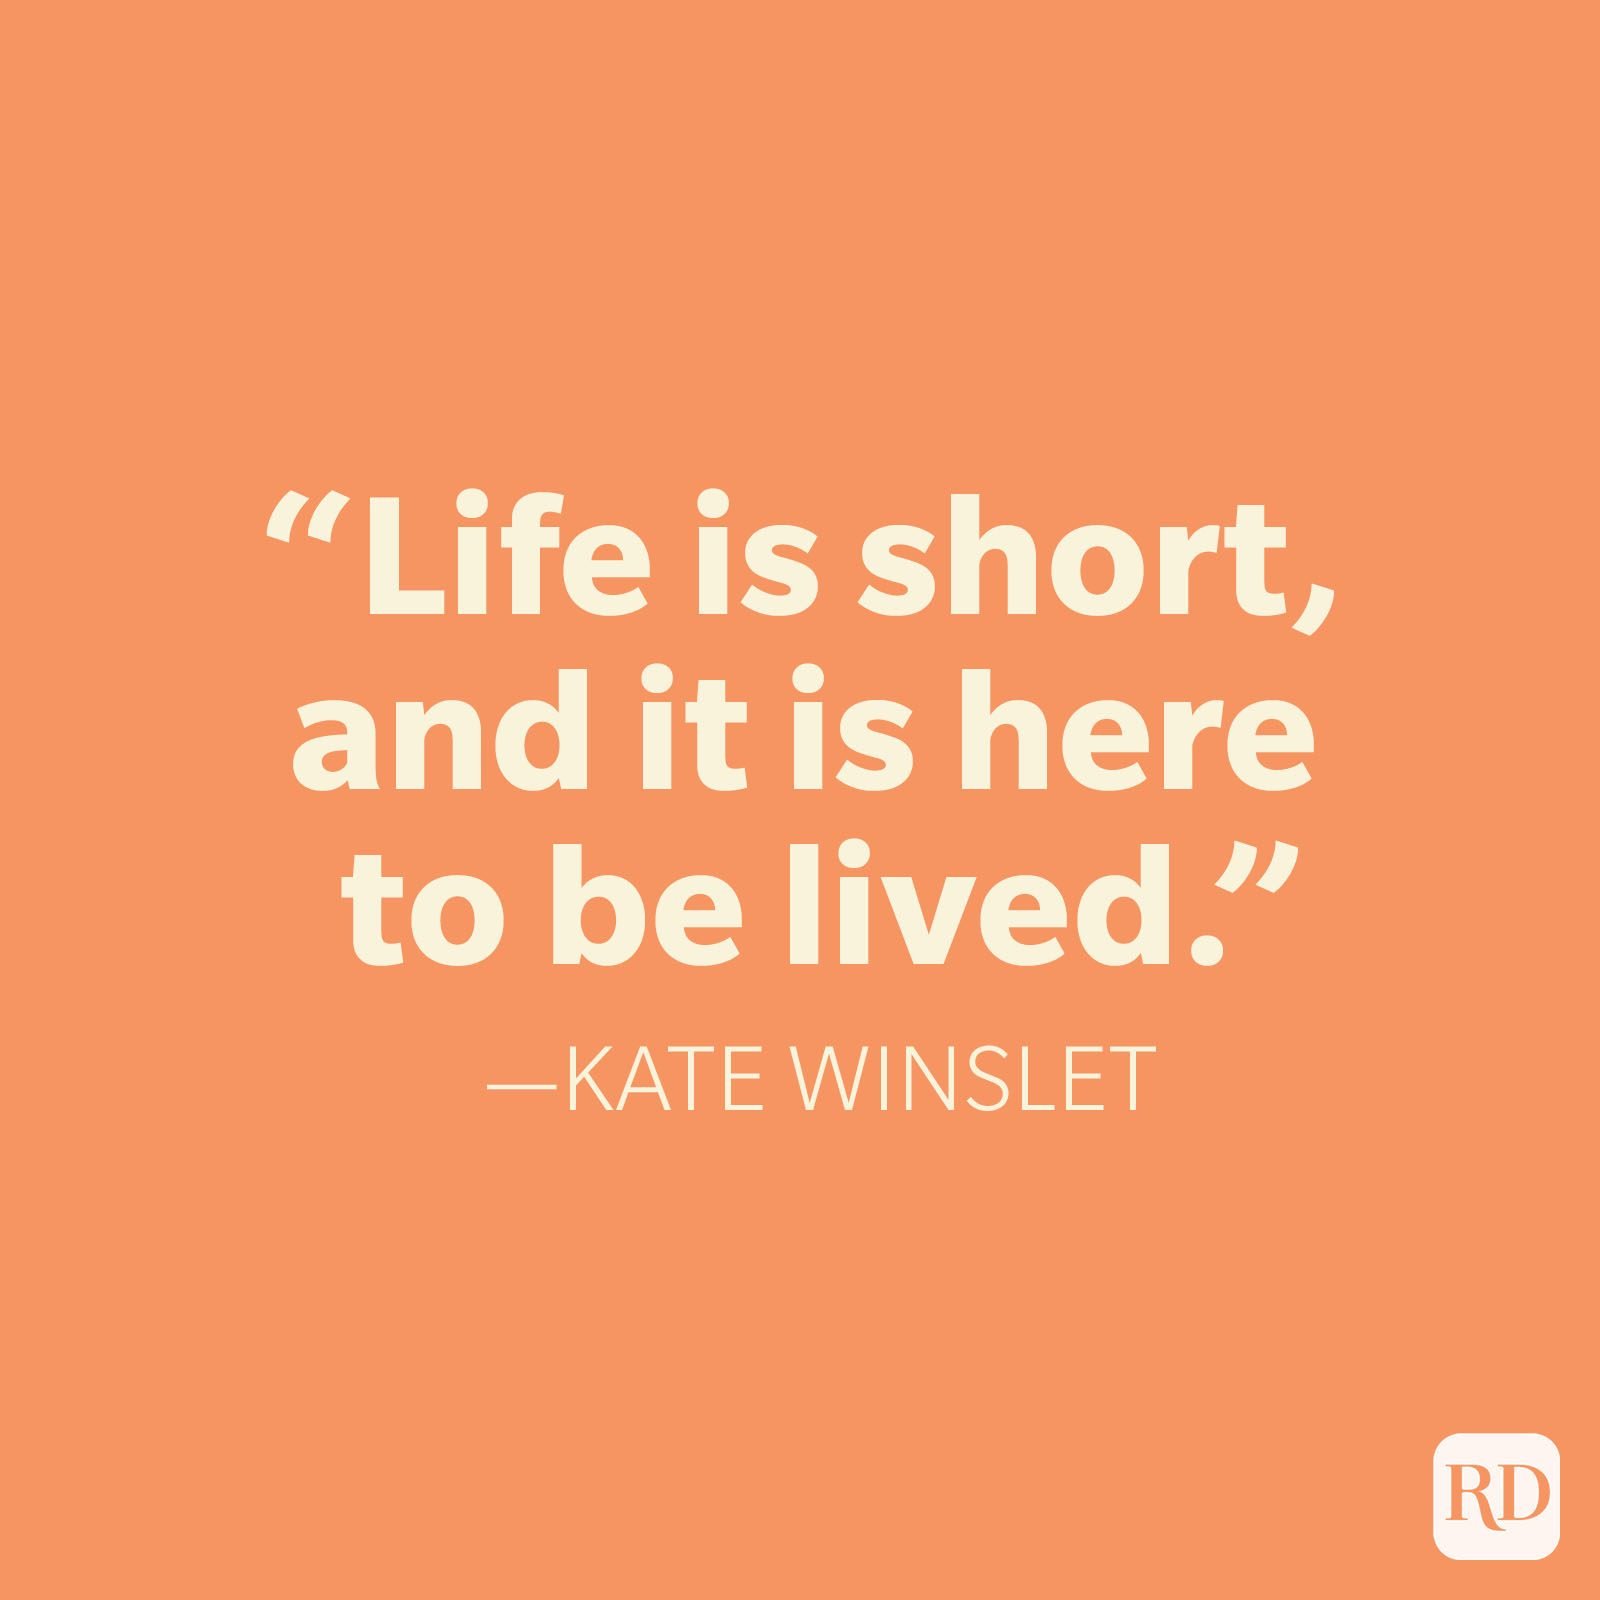 25 Life Is Short Quotes That Motivate and Inspire | Reader's Digest